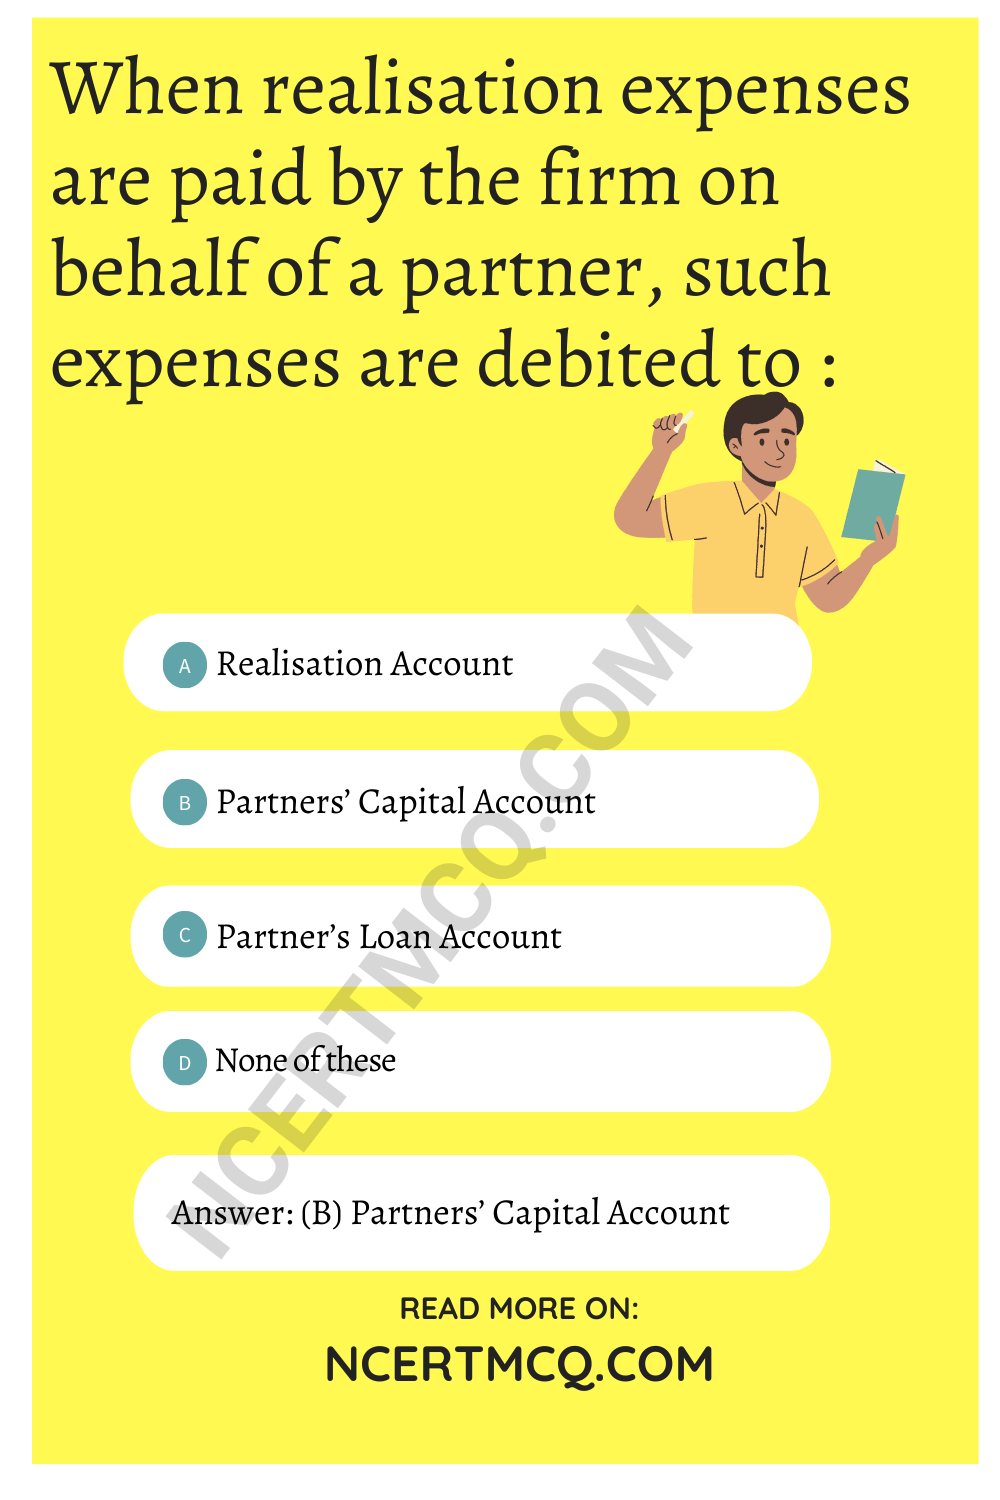 When realisation expenses are paid by the firm on behalf of a partner, such expenses are debited to :